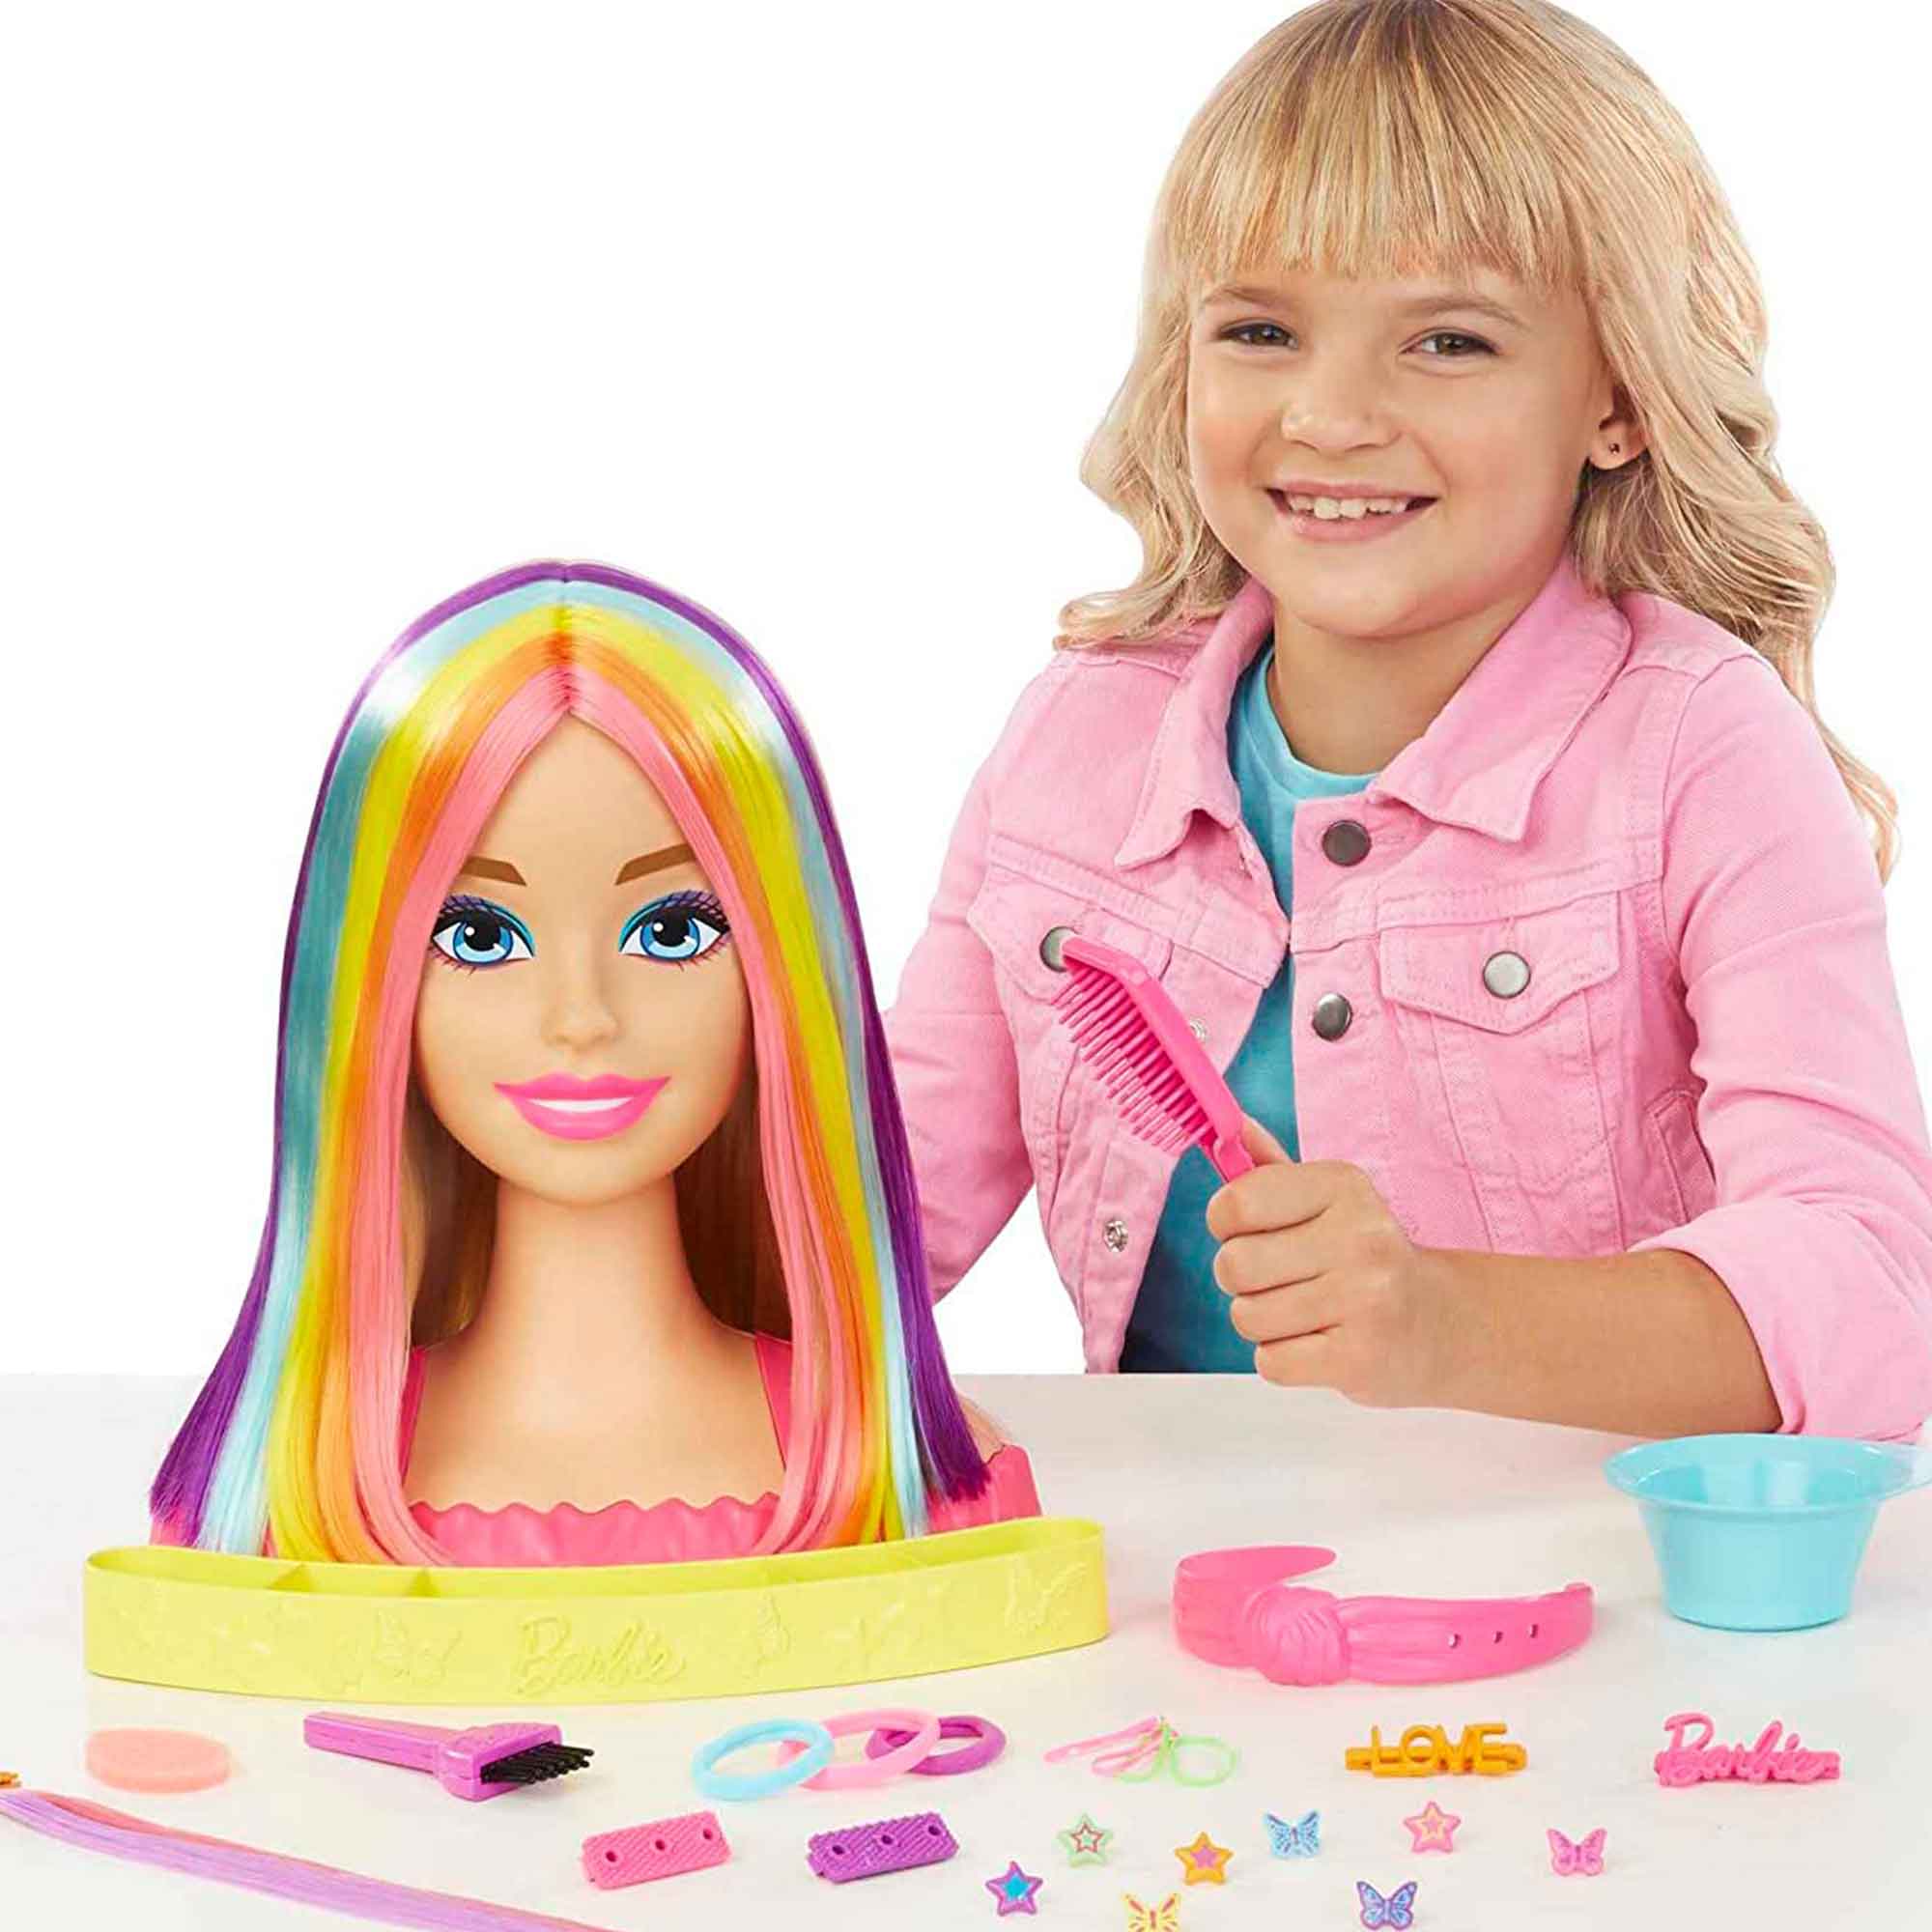 Because satire The beach Barbie Deluxe Styling Head (Blonde Rainbow Hair)